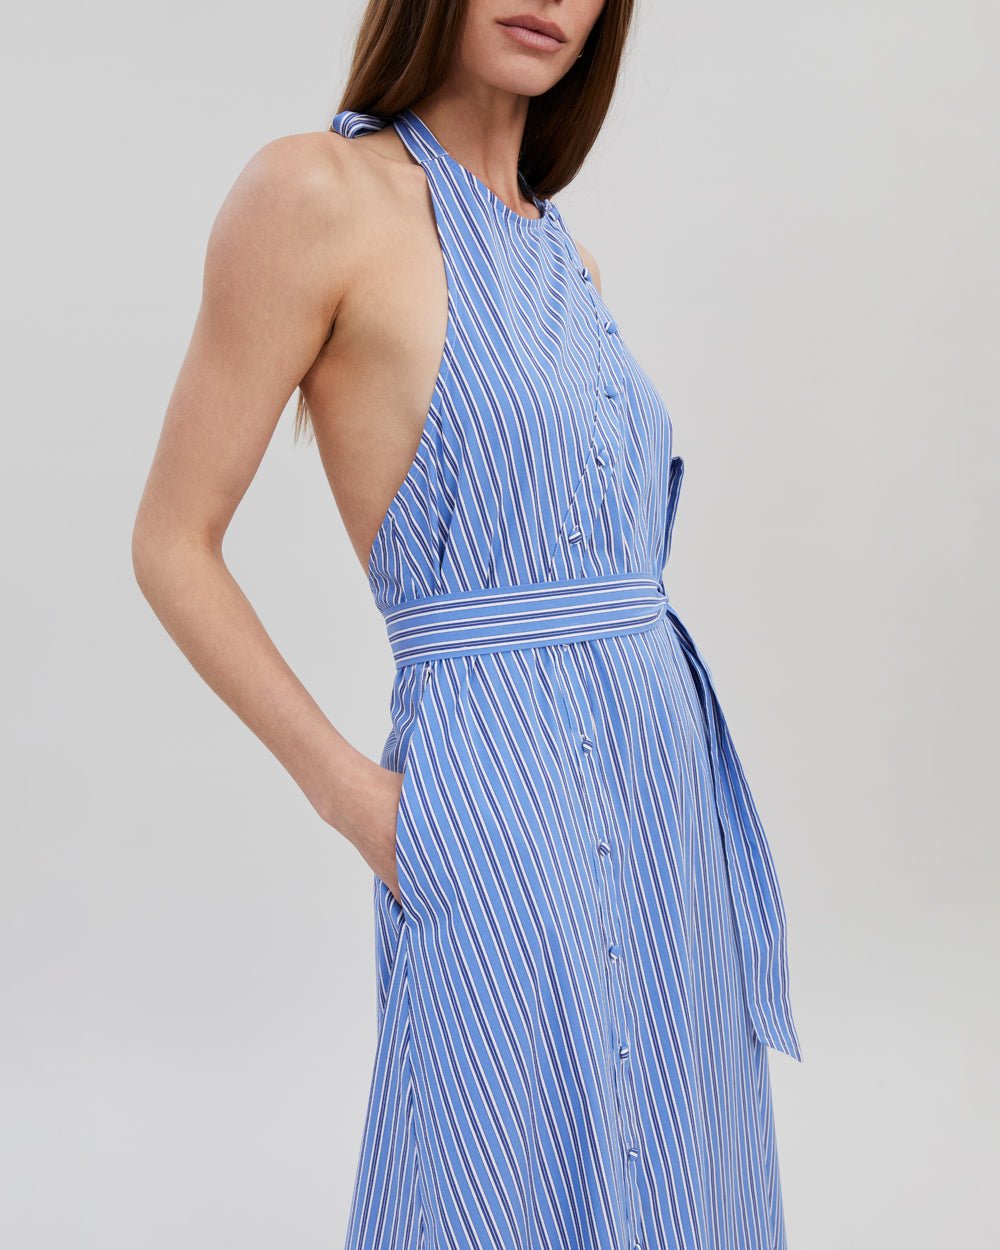 The Cara Dress - Solid & Striped